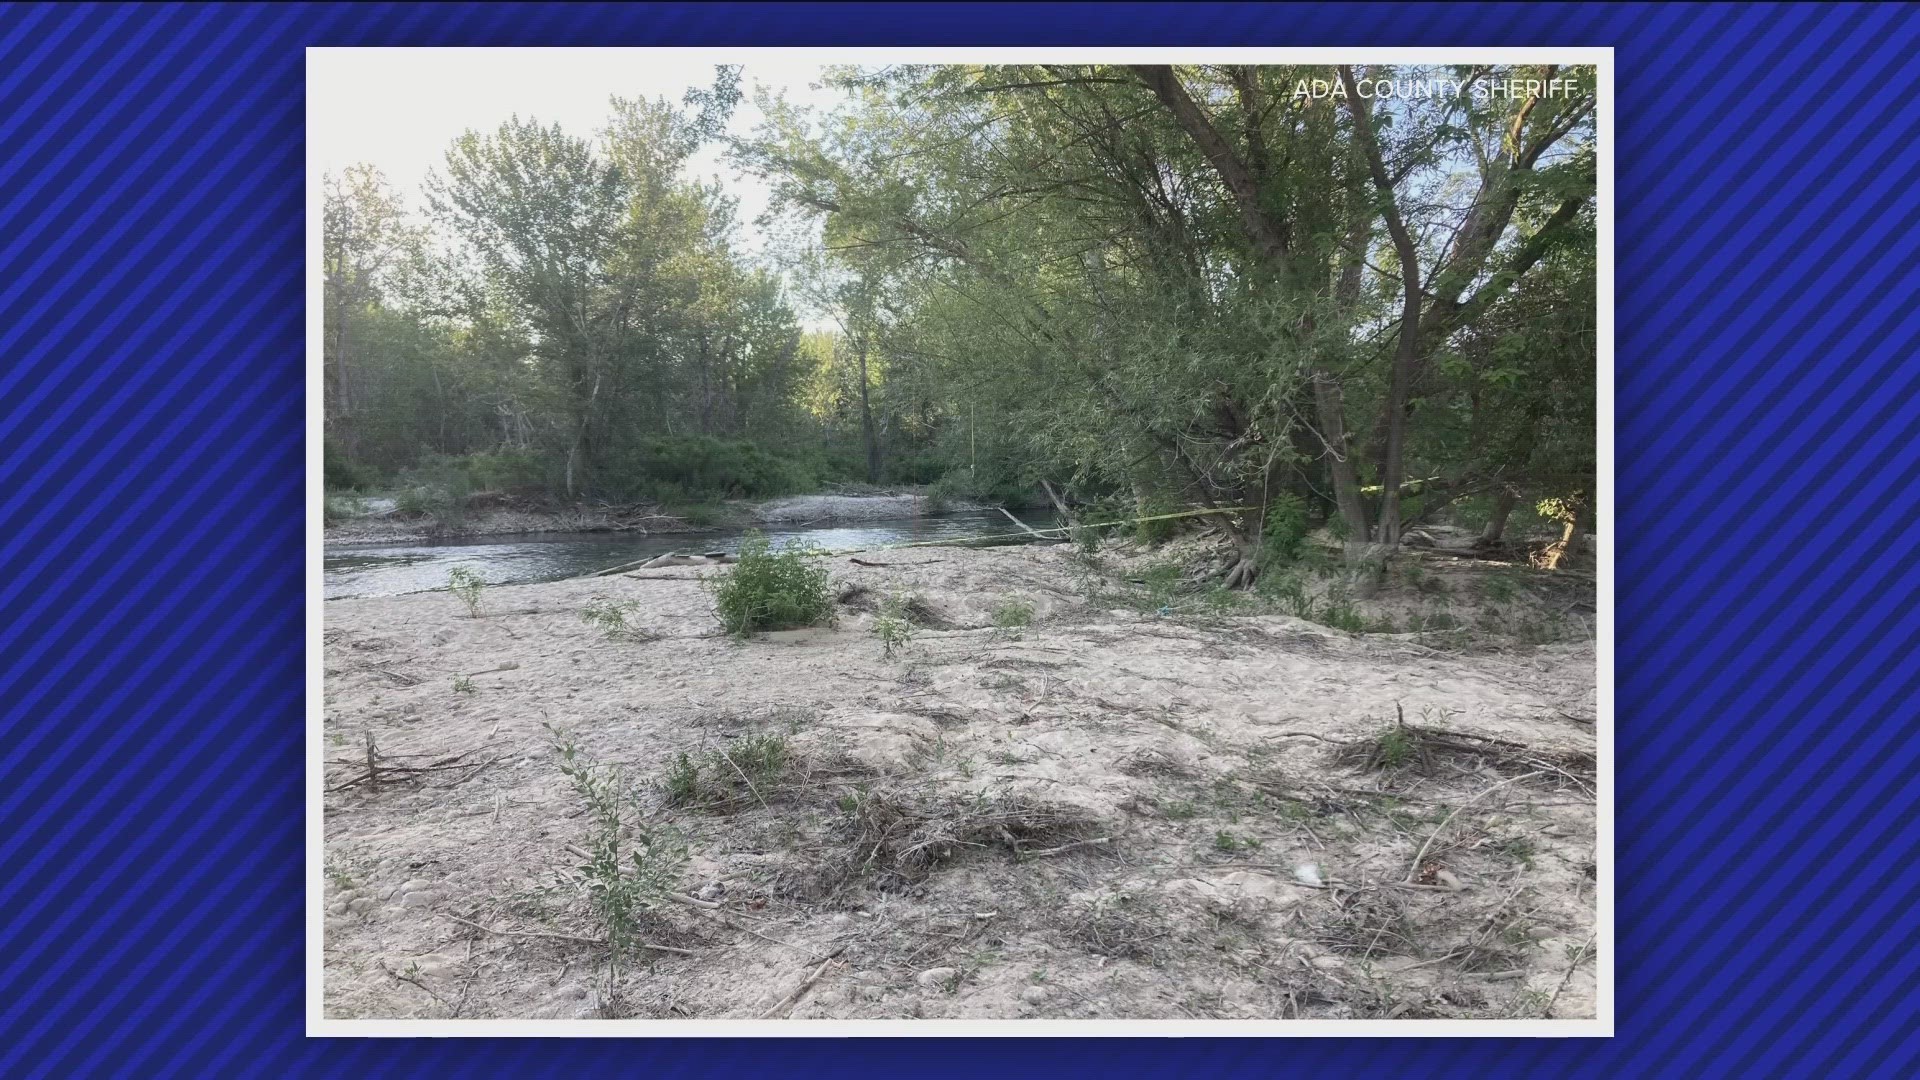 An investigation is underway after a decomposed body was found on the bank of the Boise River Thursday evening in Eagle, the Ada County Sheriff's Office said.